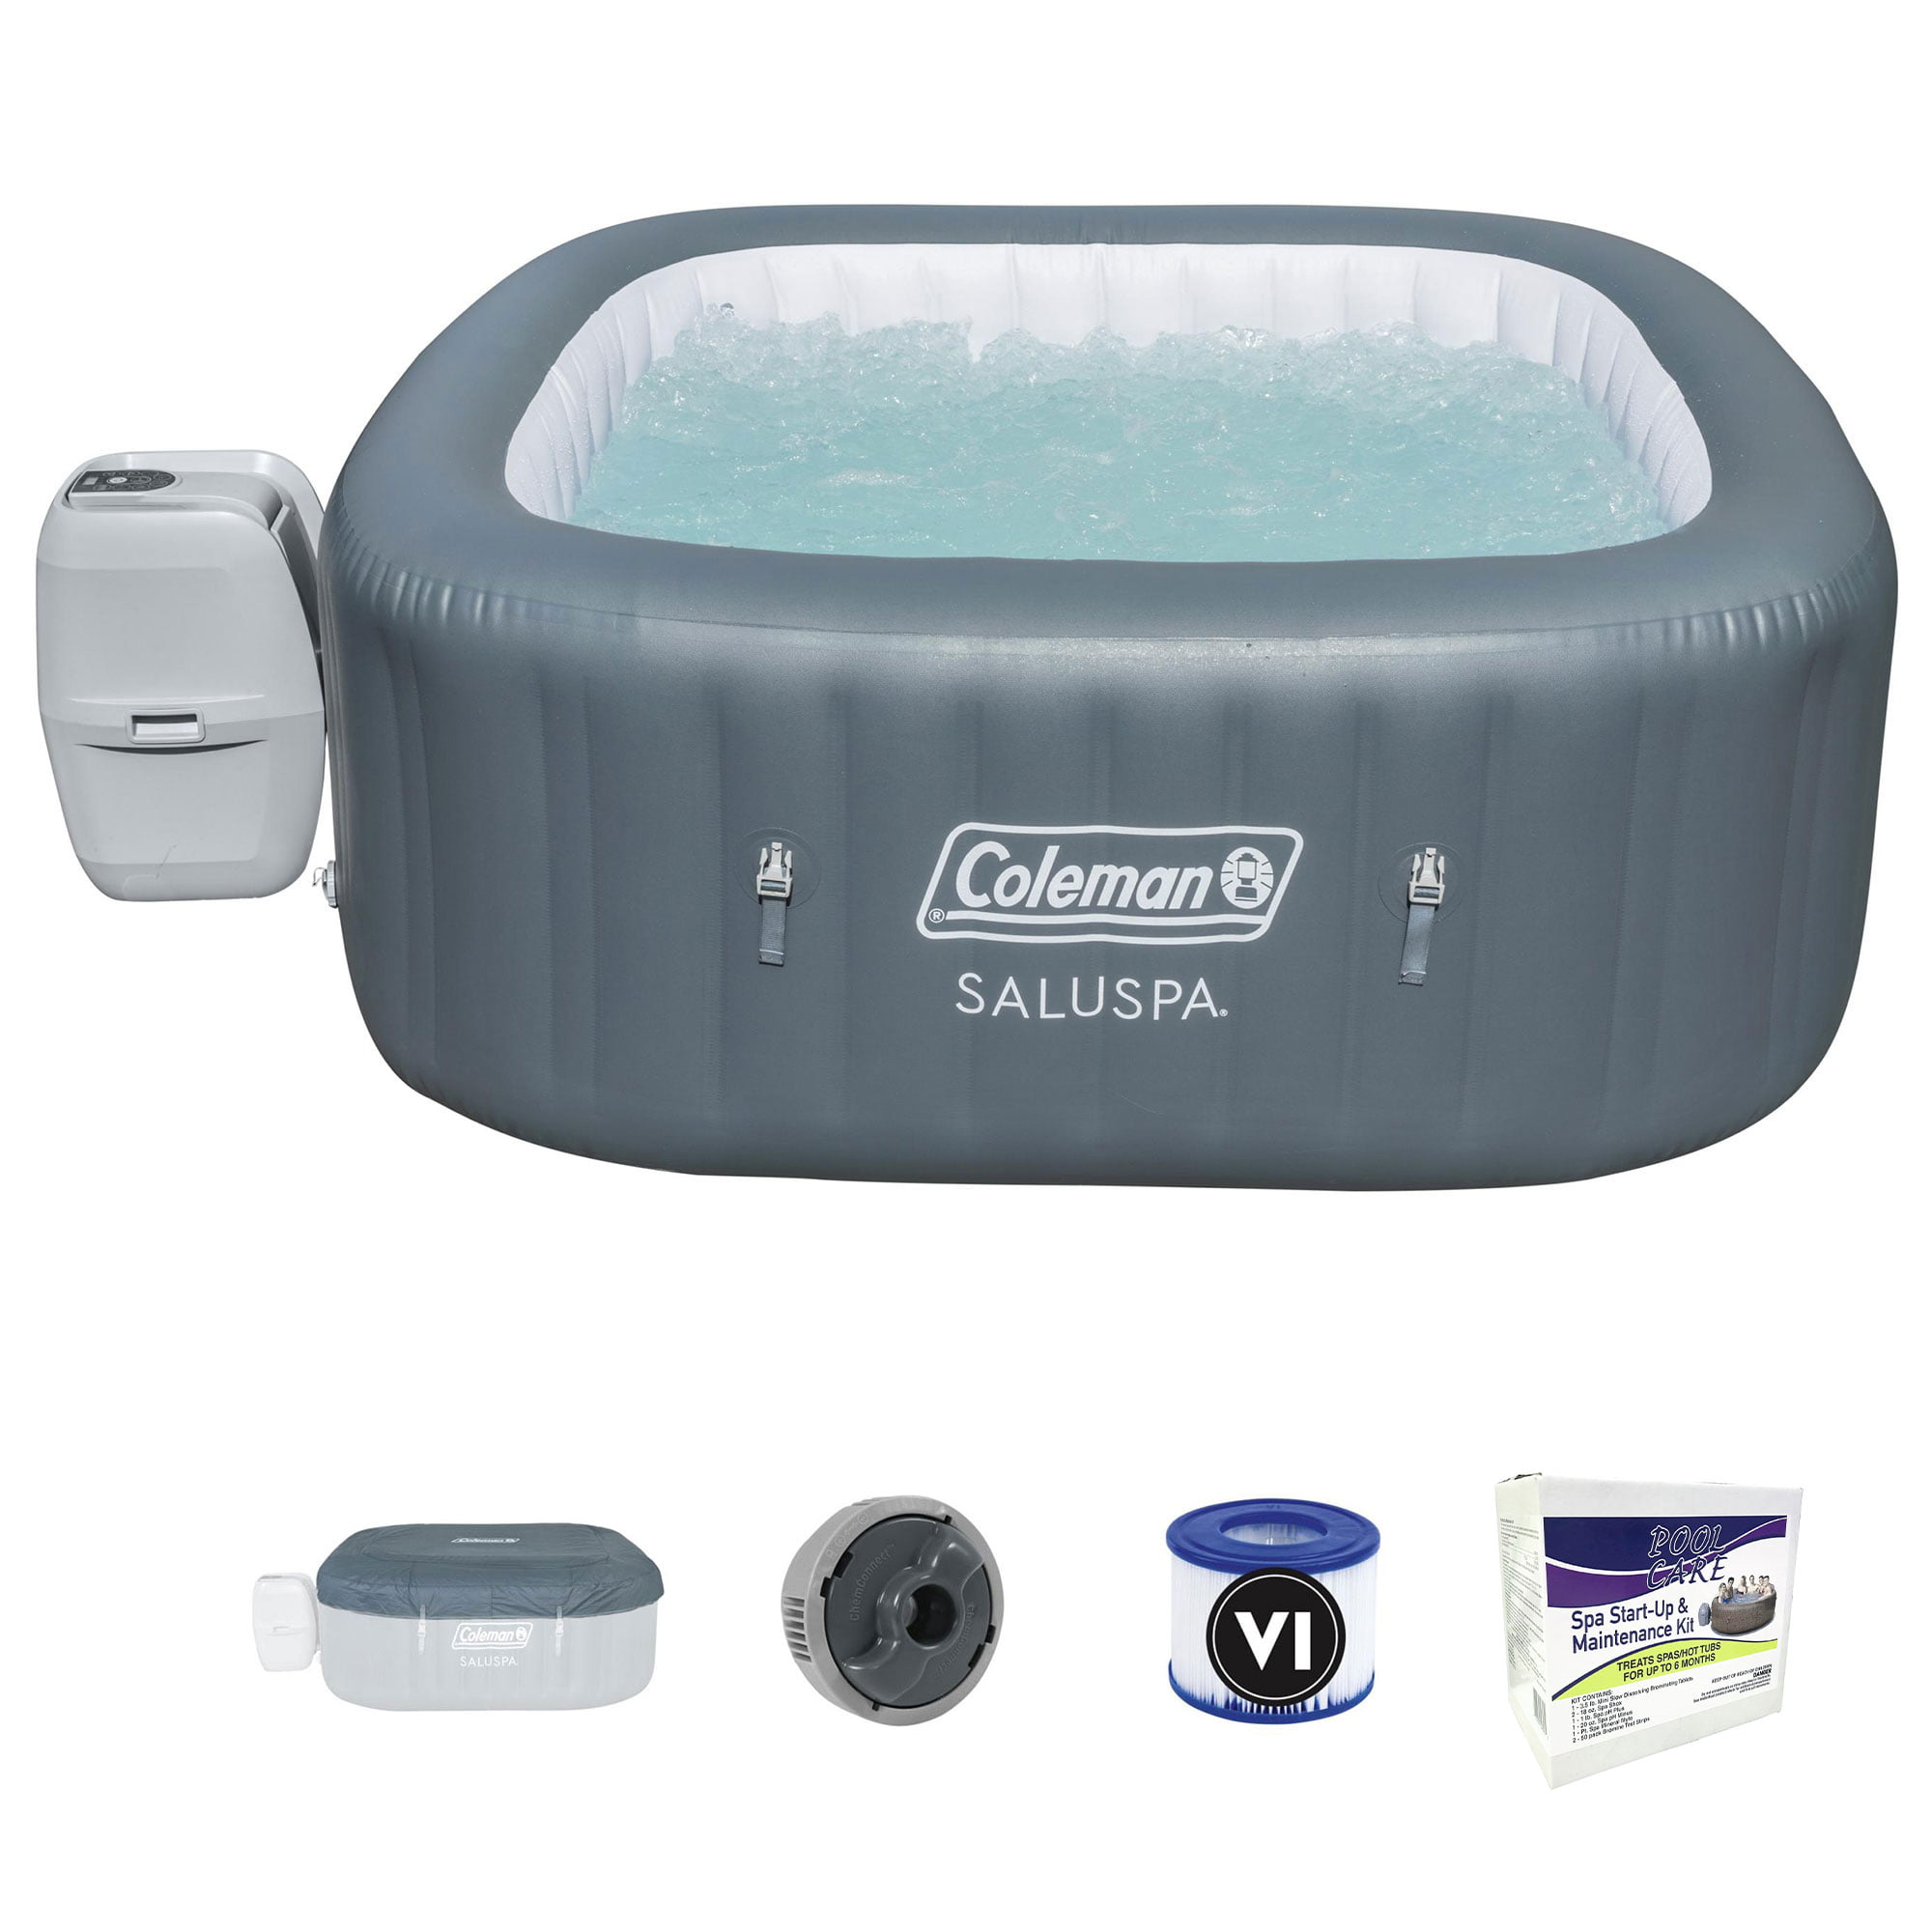 Coleman SaluSpa 4 Person Inflatable Spa Black & Qualco 6 Month Chemical Kit 